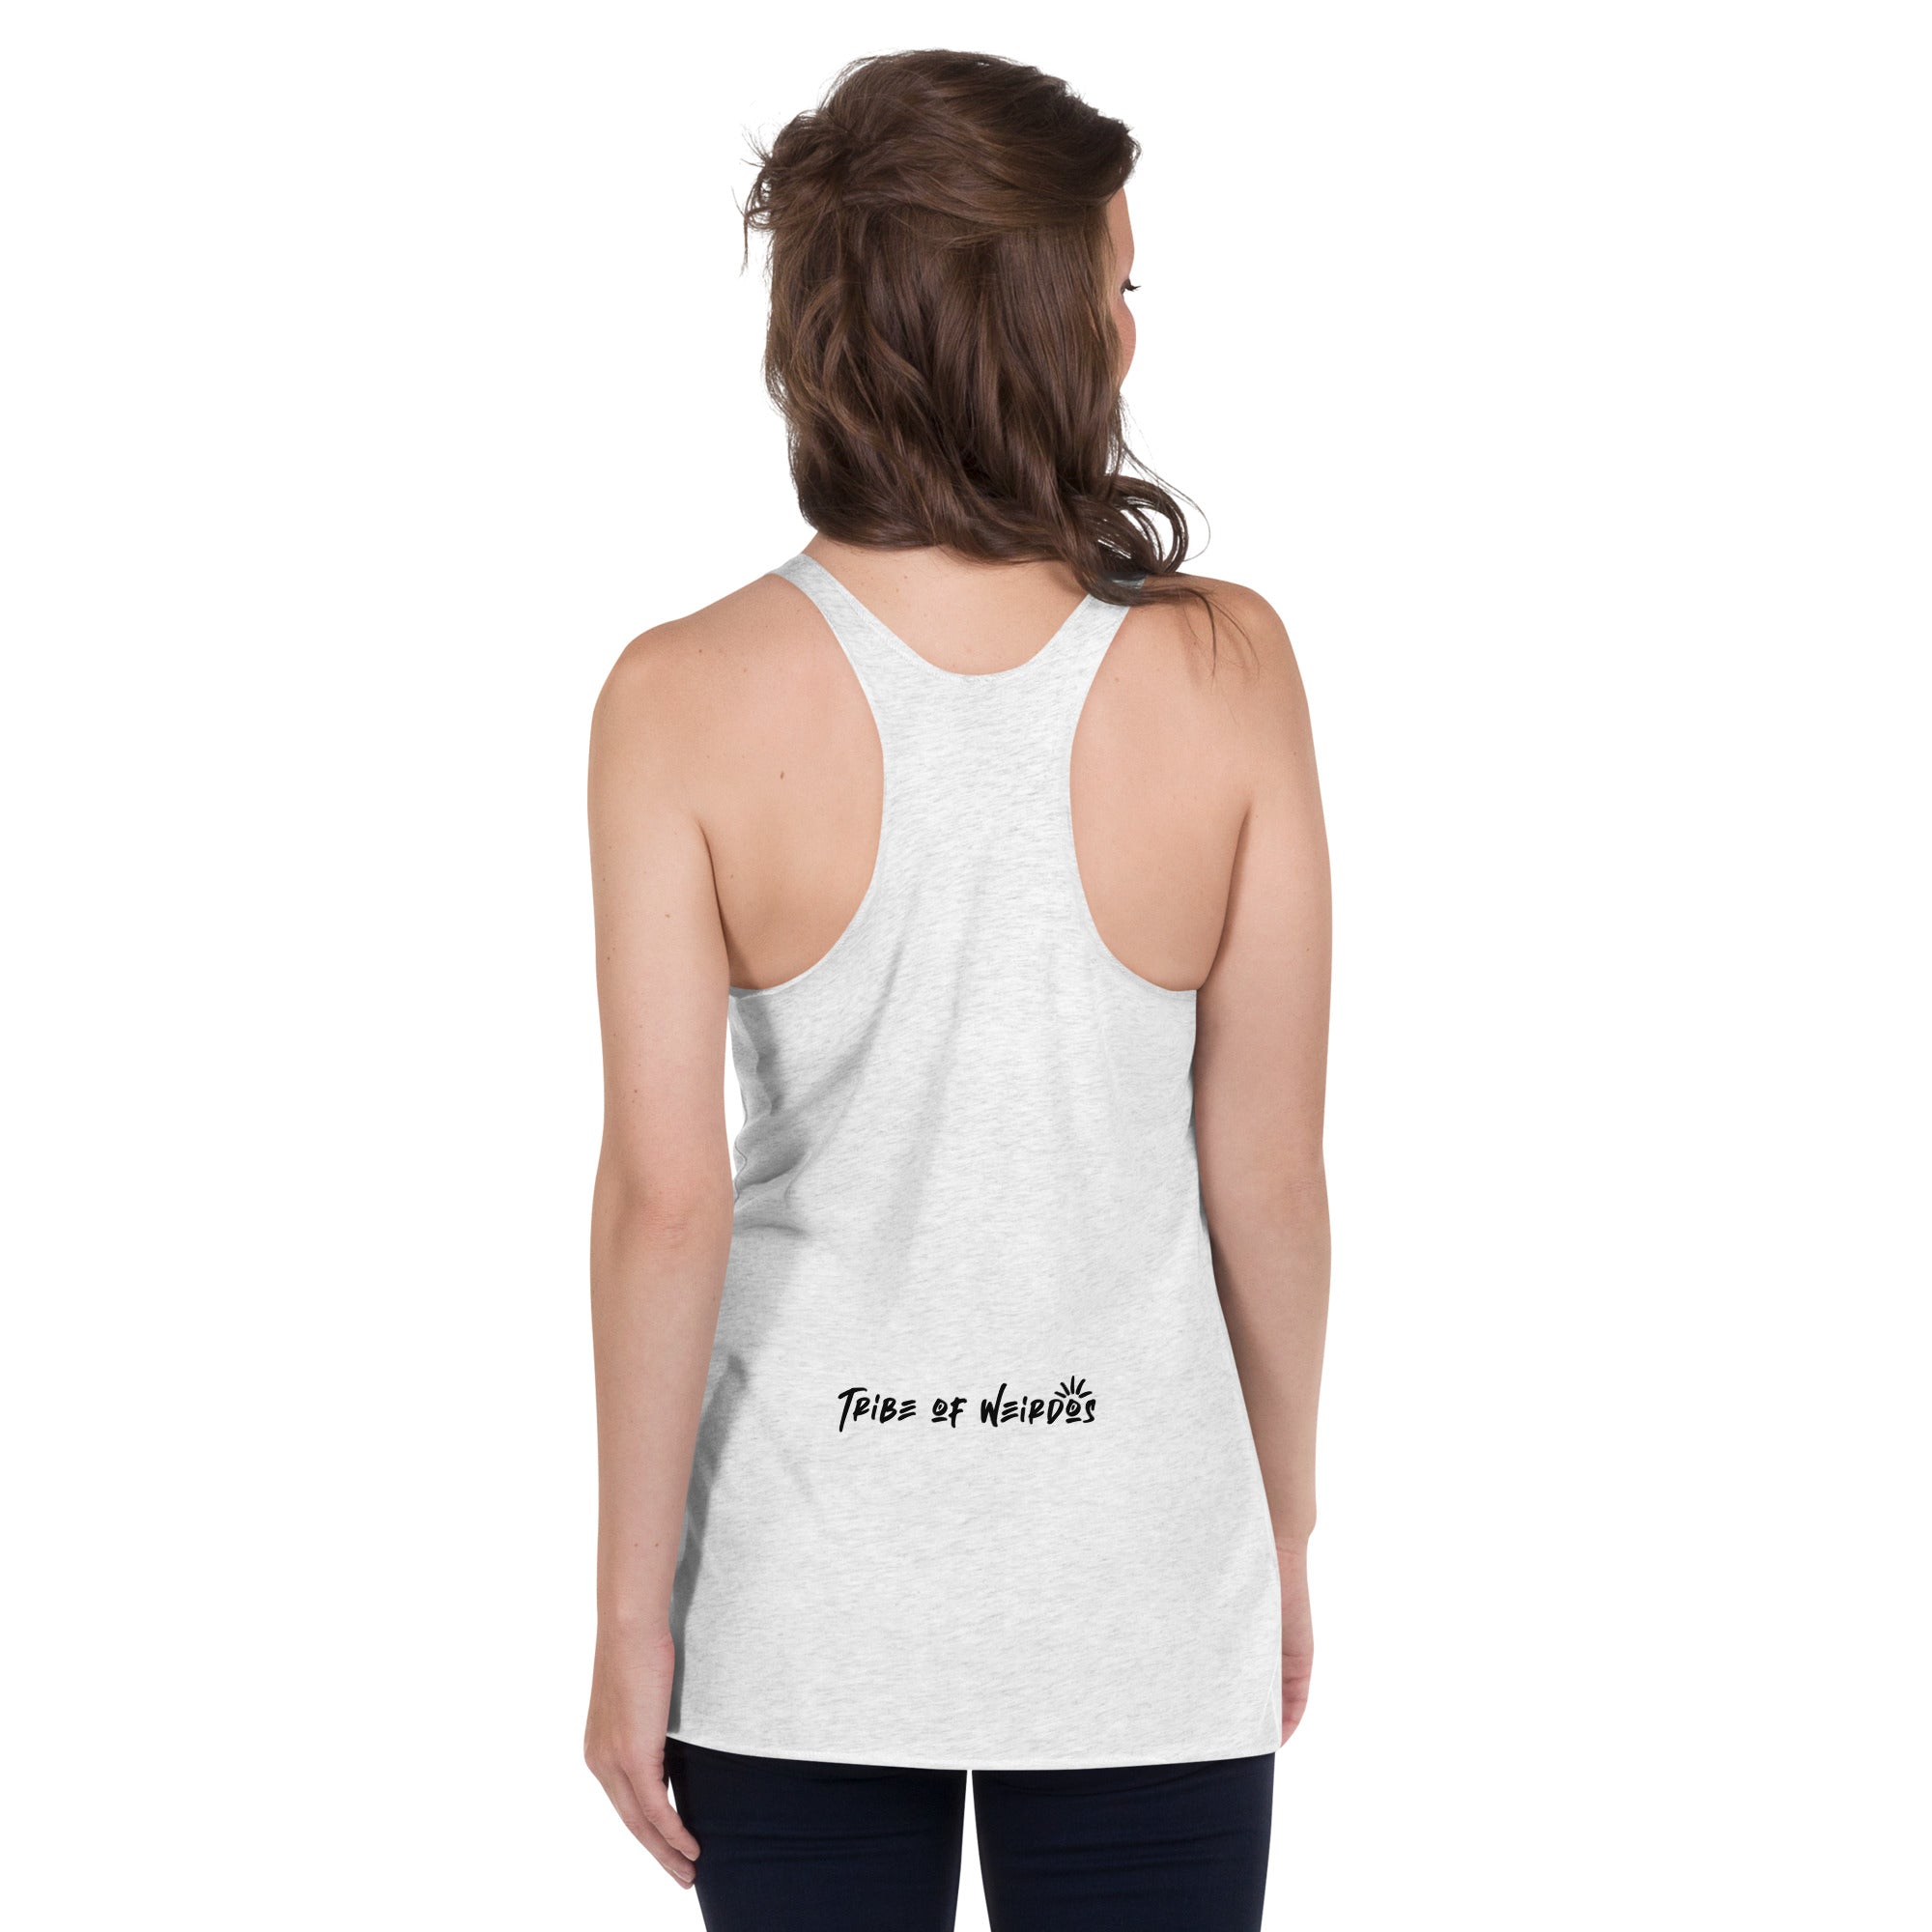 Empowering 'Protect Your Peace - Women's Racerback Tank' in soft fabric, featuring the iconic Tribe of Weirdos emblem, perfect for those who value comfort and a peace-driven lifestyle.